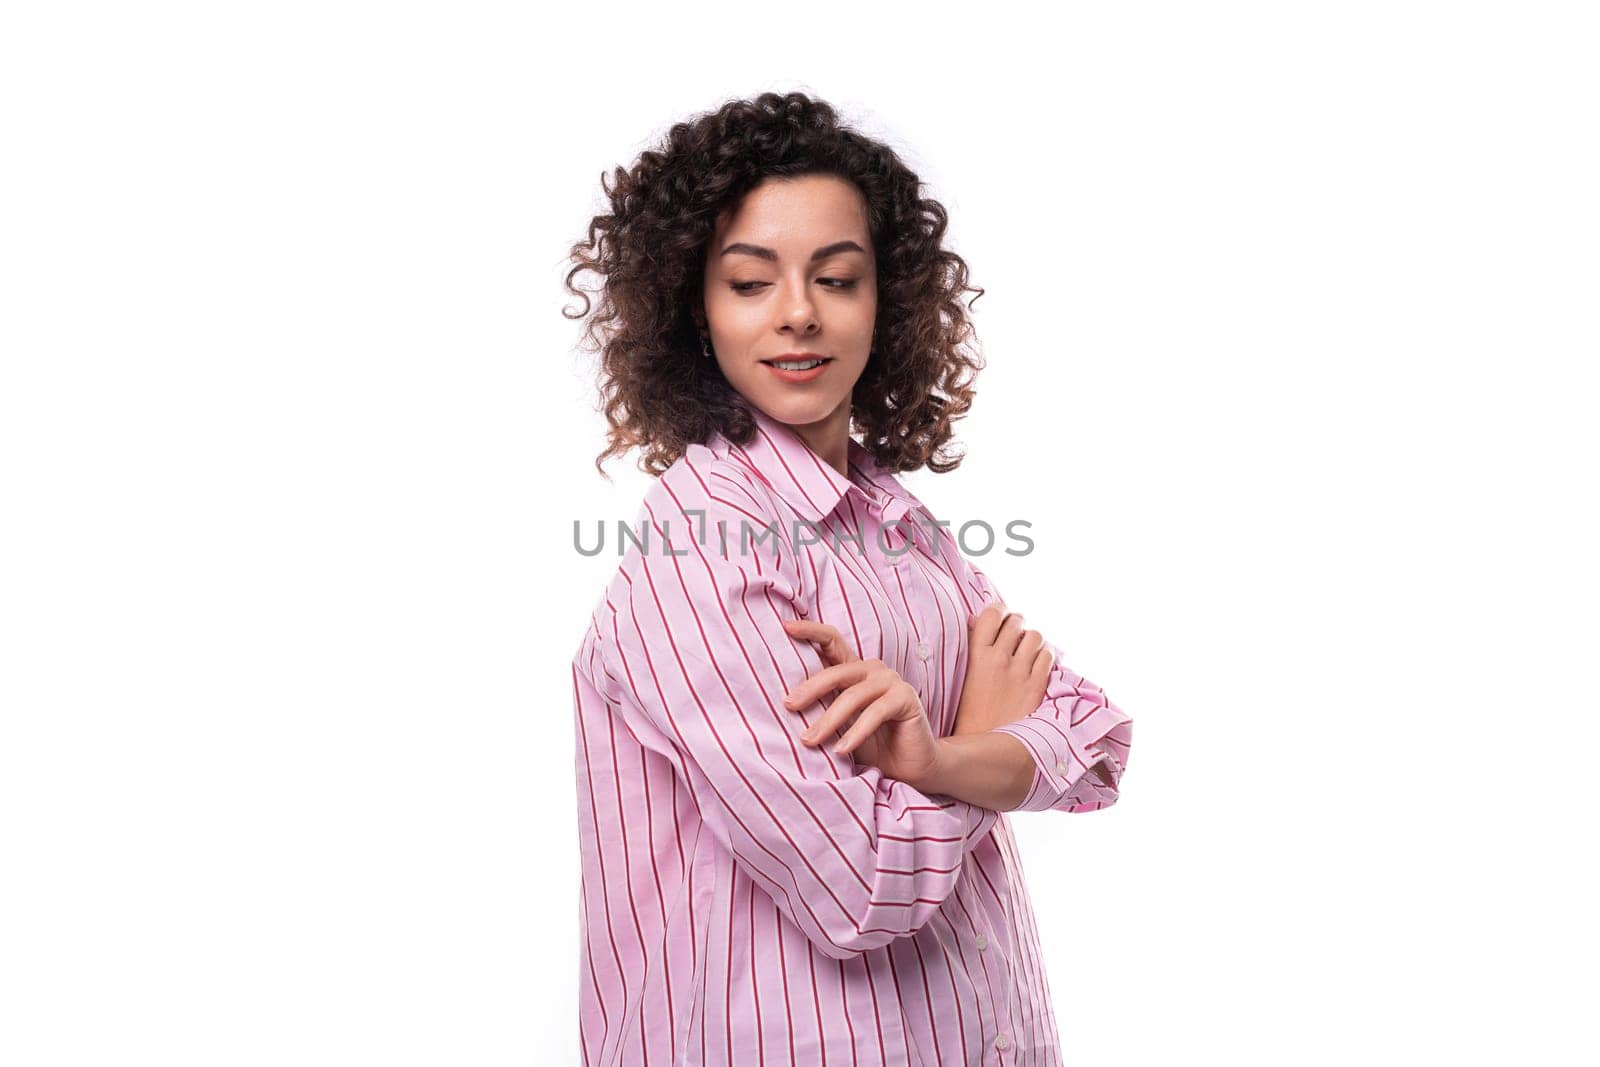 portrait of a 30 year old authentic slim curly brunette model woman wearing a pink shirt.